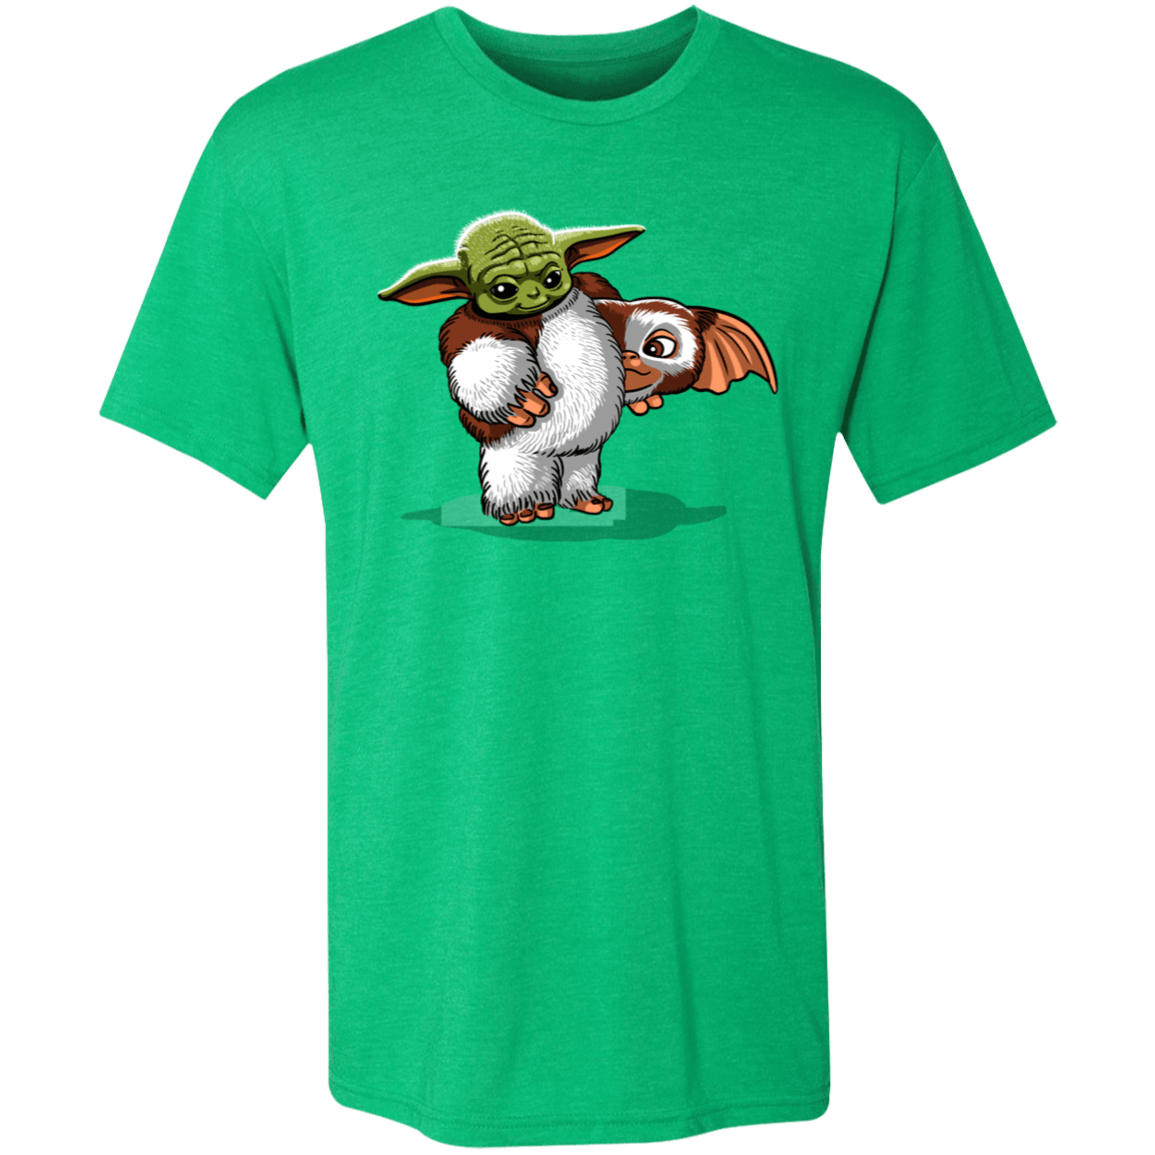 T-Shirts Envy / S Baby in Disguise Men's Triblend T-Shirt